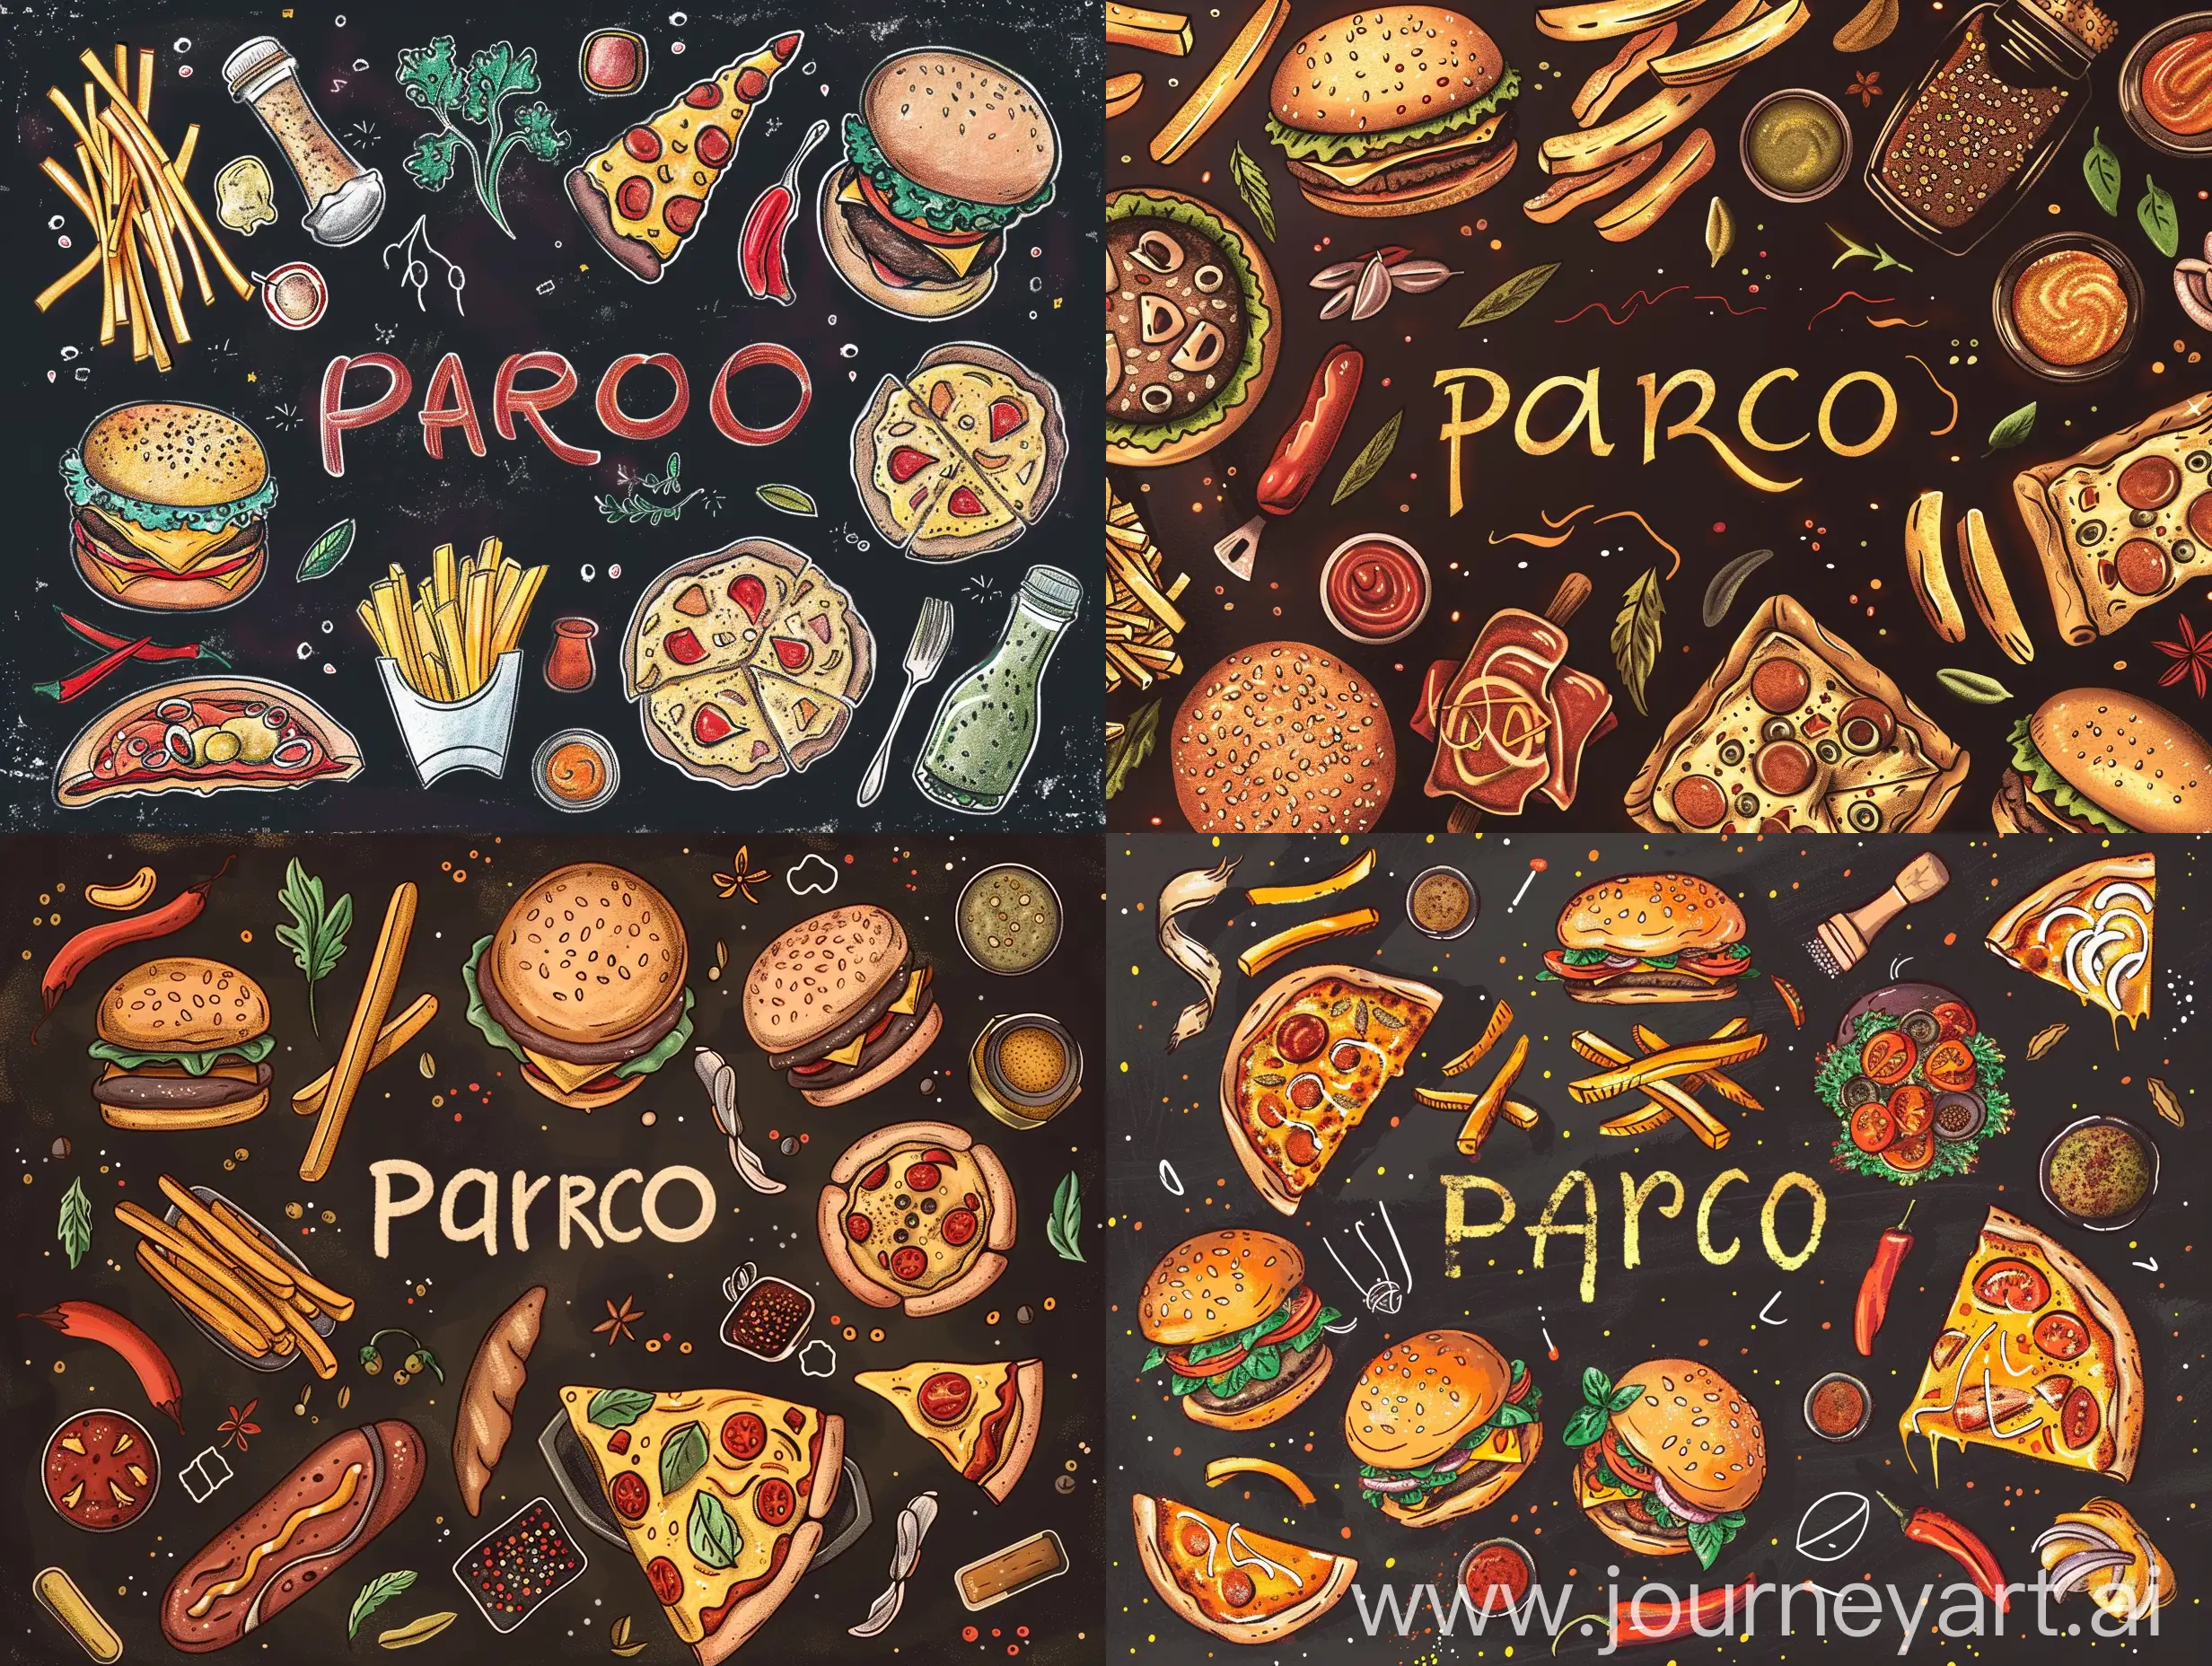 Savory-Delights-Parco-Restaurants-Culinary-Feast-on-a-Dark-Canvas